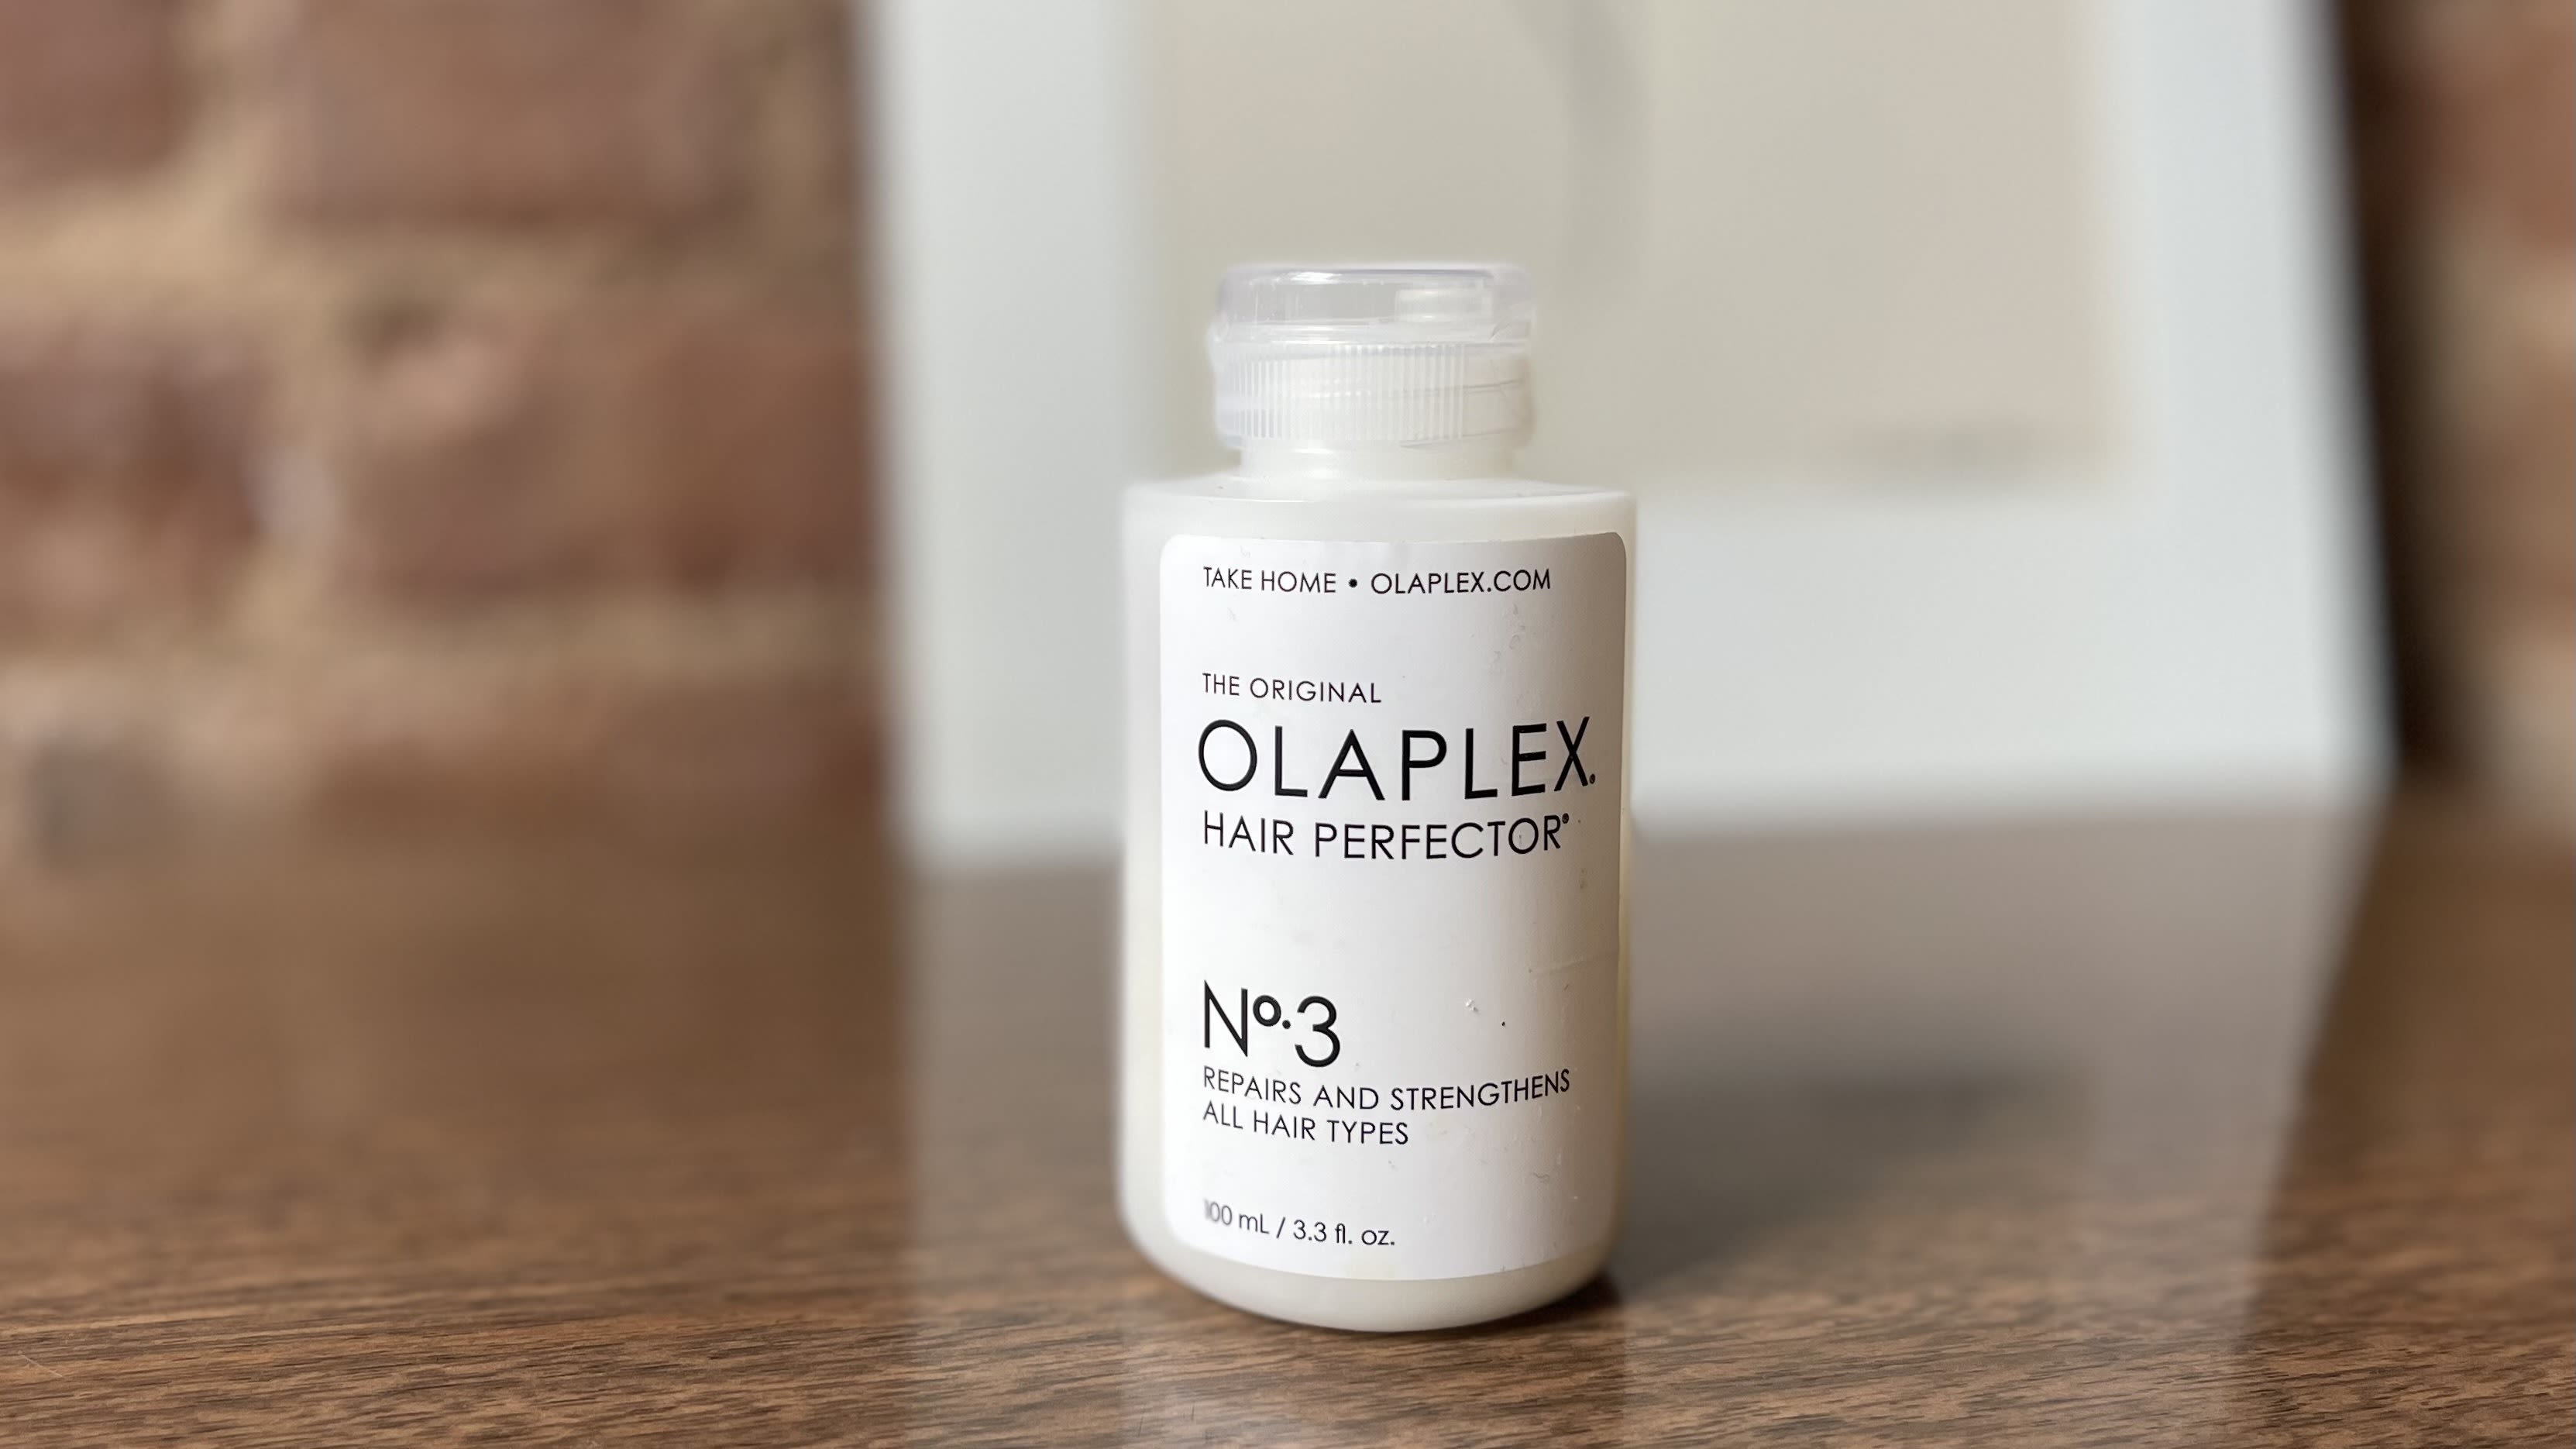 Olaplex No.3 Hair Perfector review: Learn about this treatment system | CNN Underscored